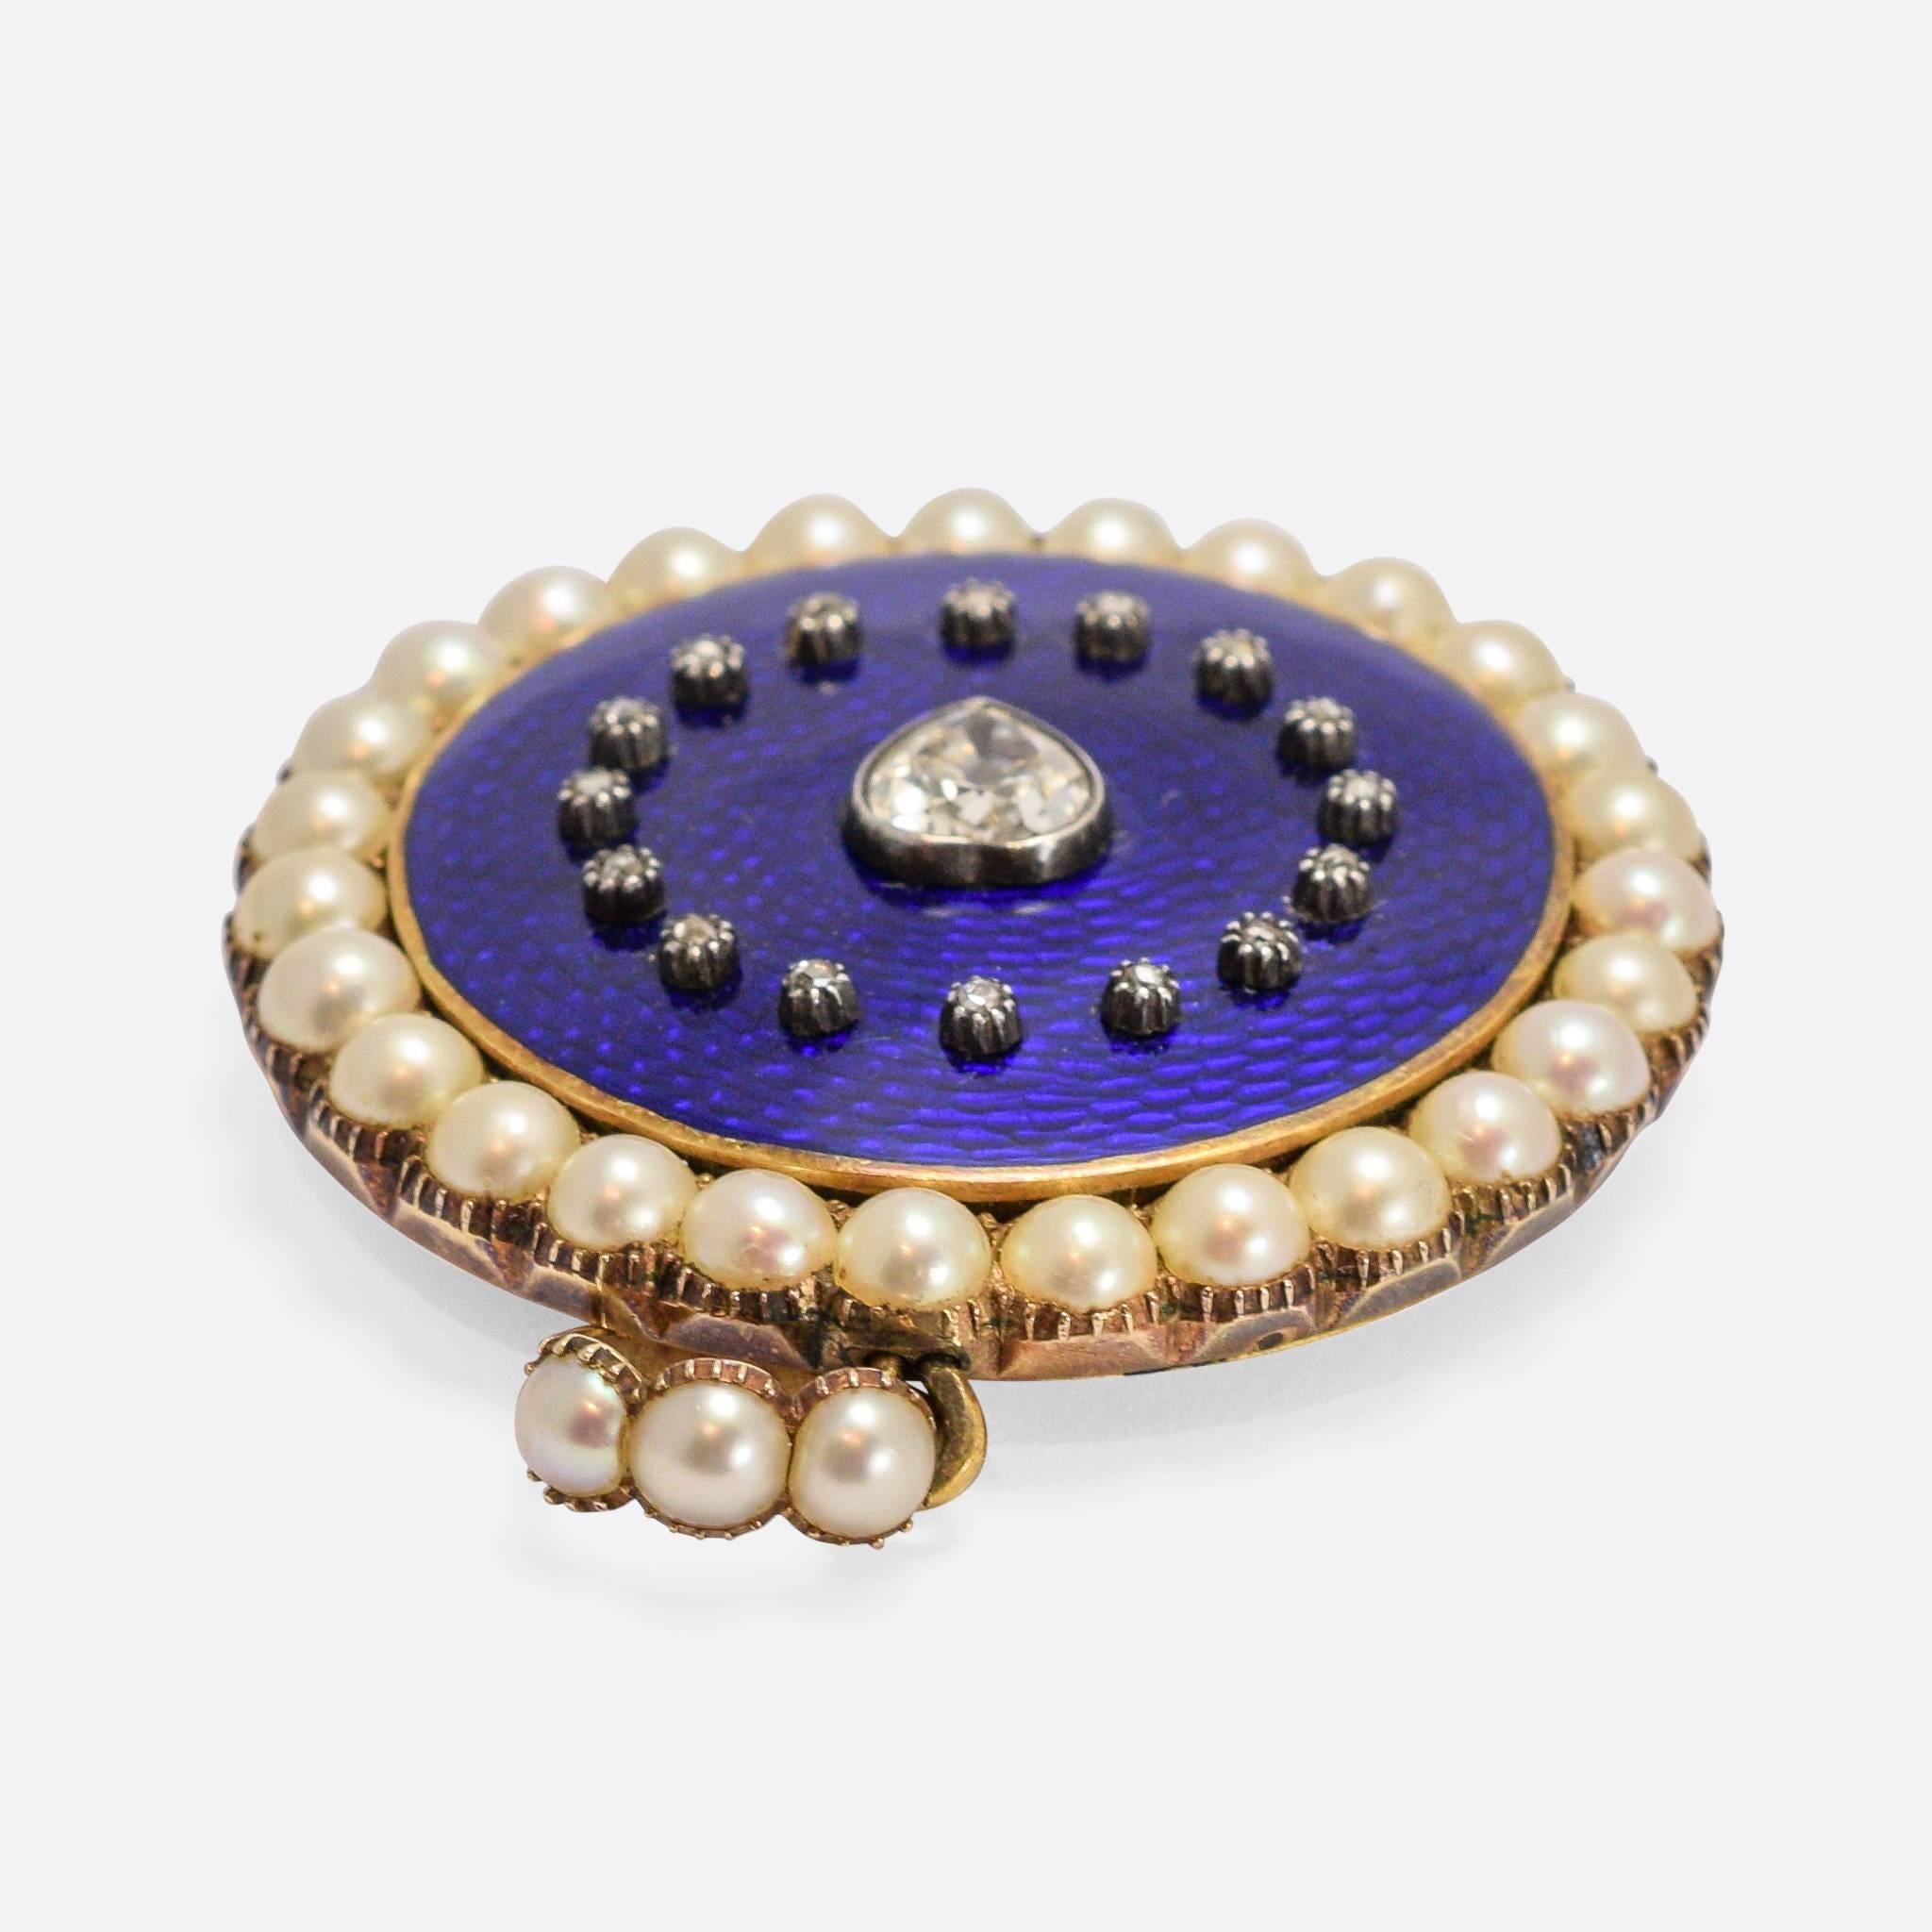 An exceptional early 19th Century locket, with a central pear-shaped diamond (set to look like a heart) within a halo of rose cuts and an outer halo of natural pearls. The front is finished in fine guilloché enamel - a vitreous Royal Blue in colour